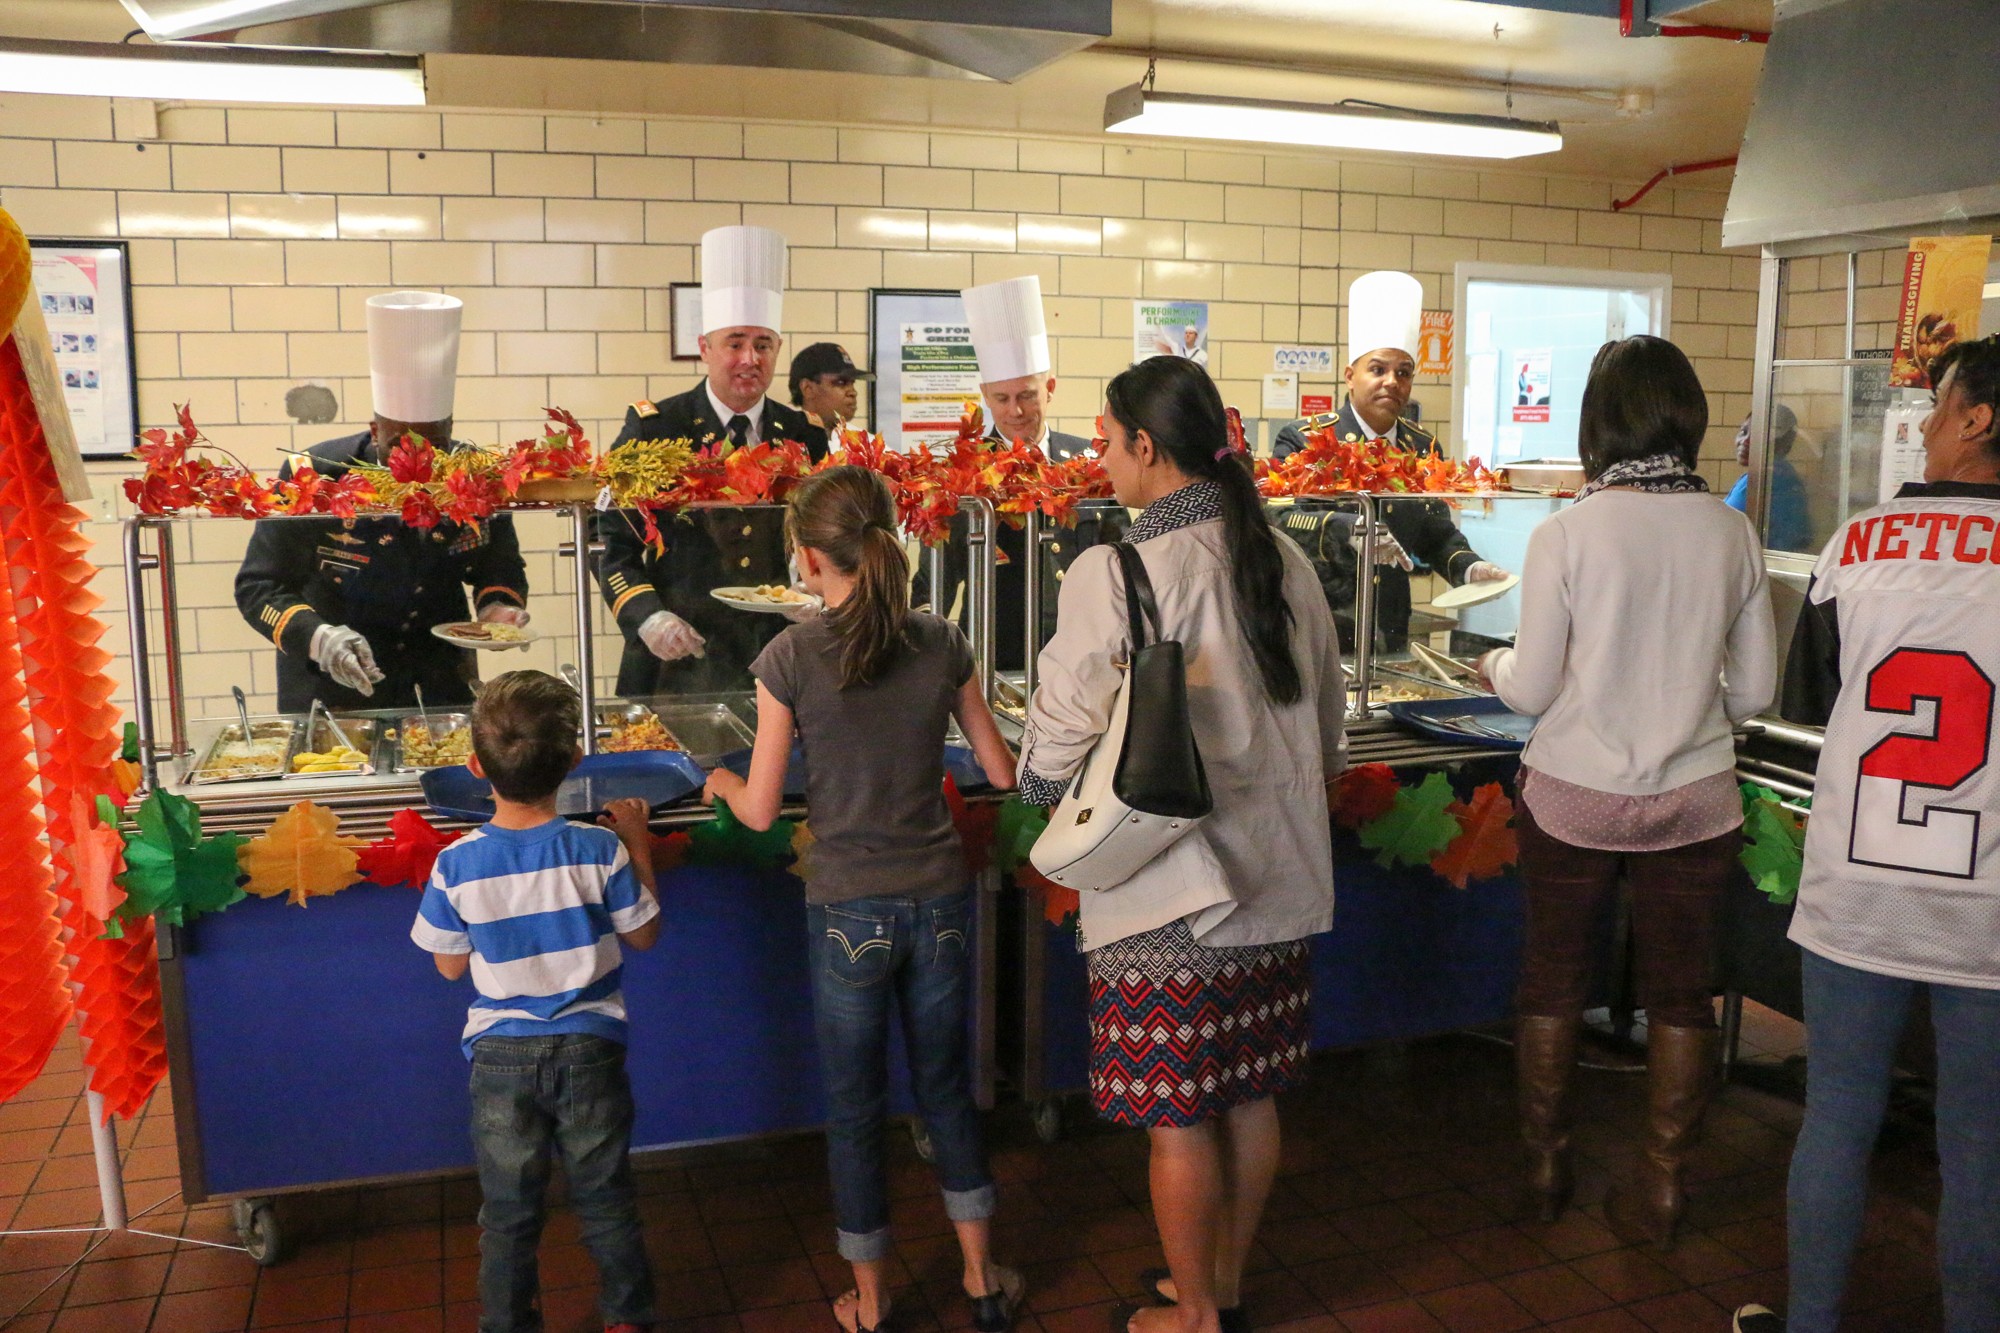 Fort dining facilities celebrate Thanksgiving | Article | The United ...